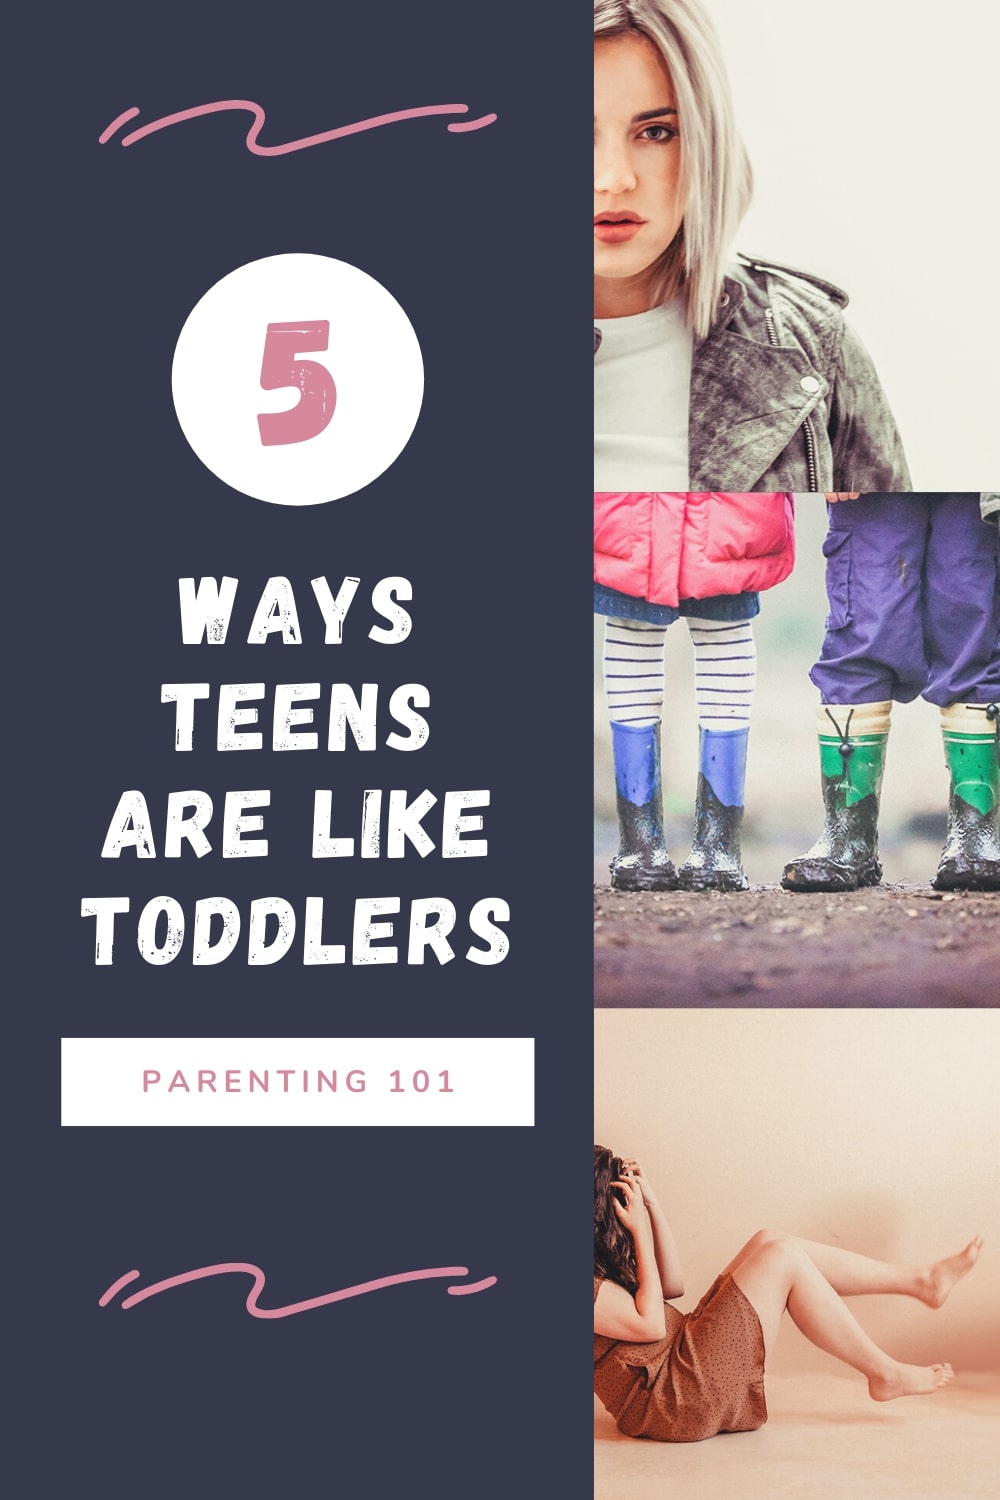 5 ways teens are like toddlers